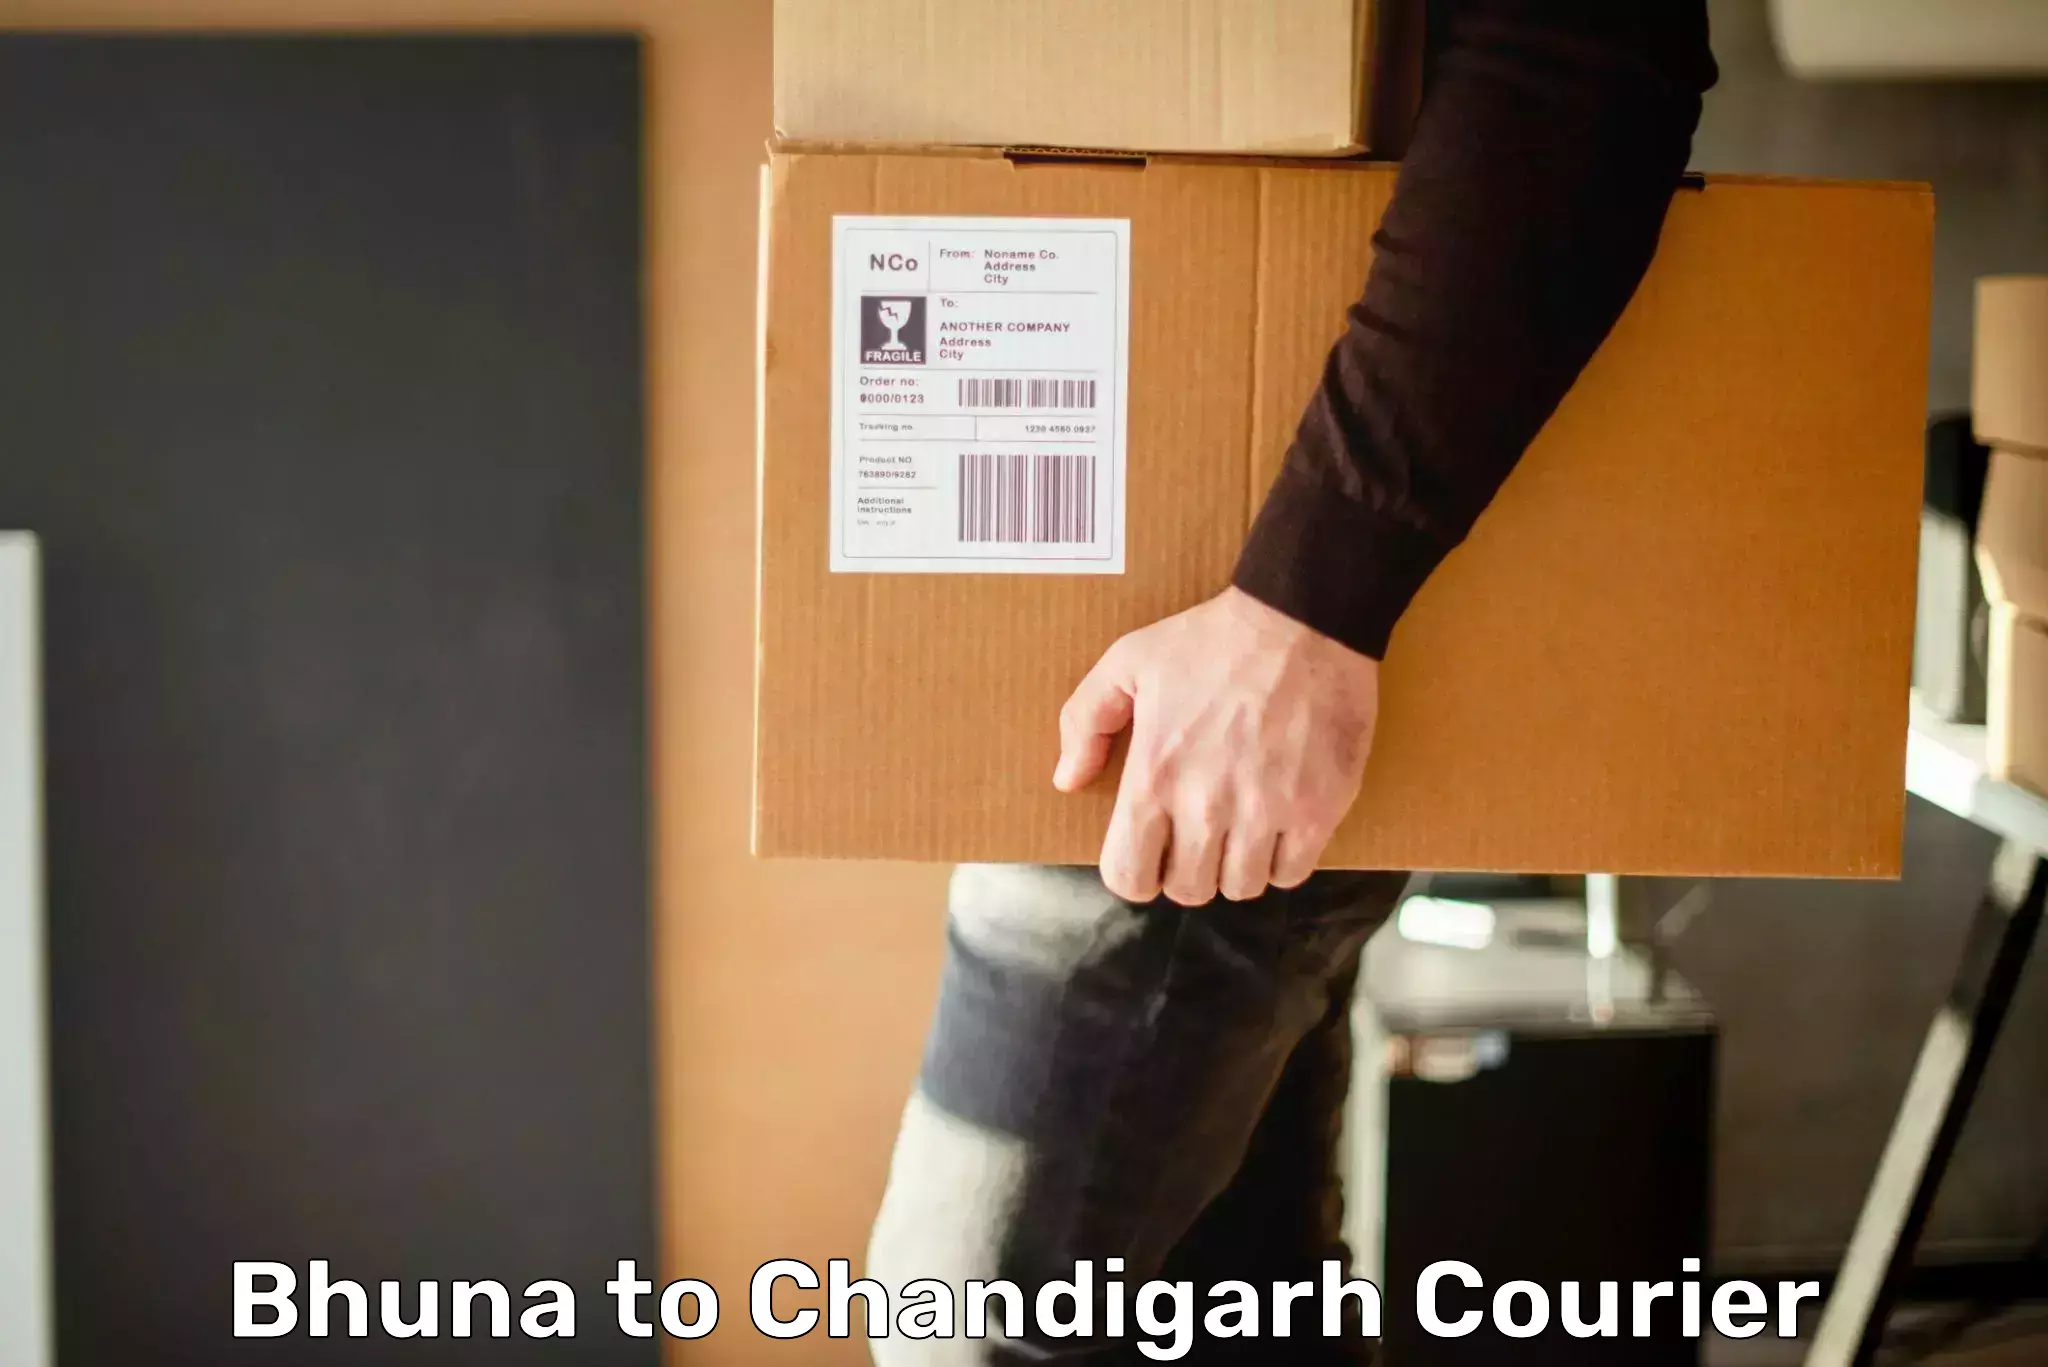 Comprehensive shipping services Bhuna to Chandigarh